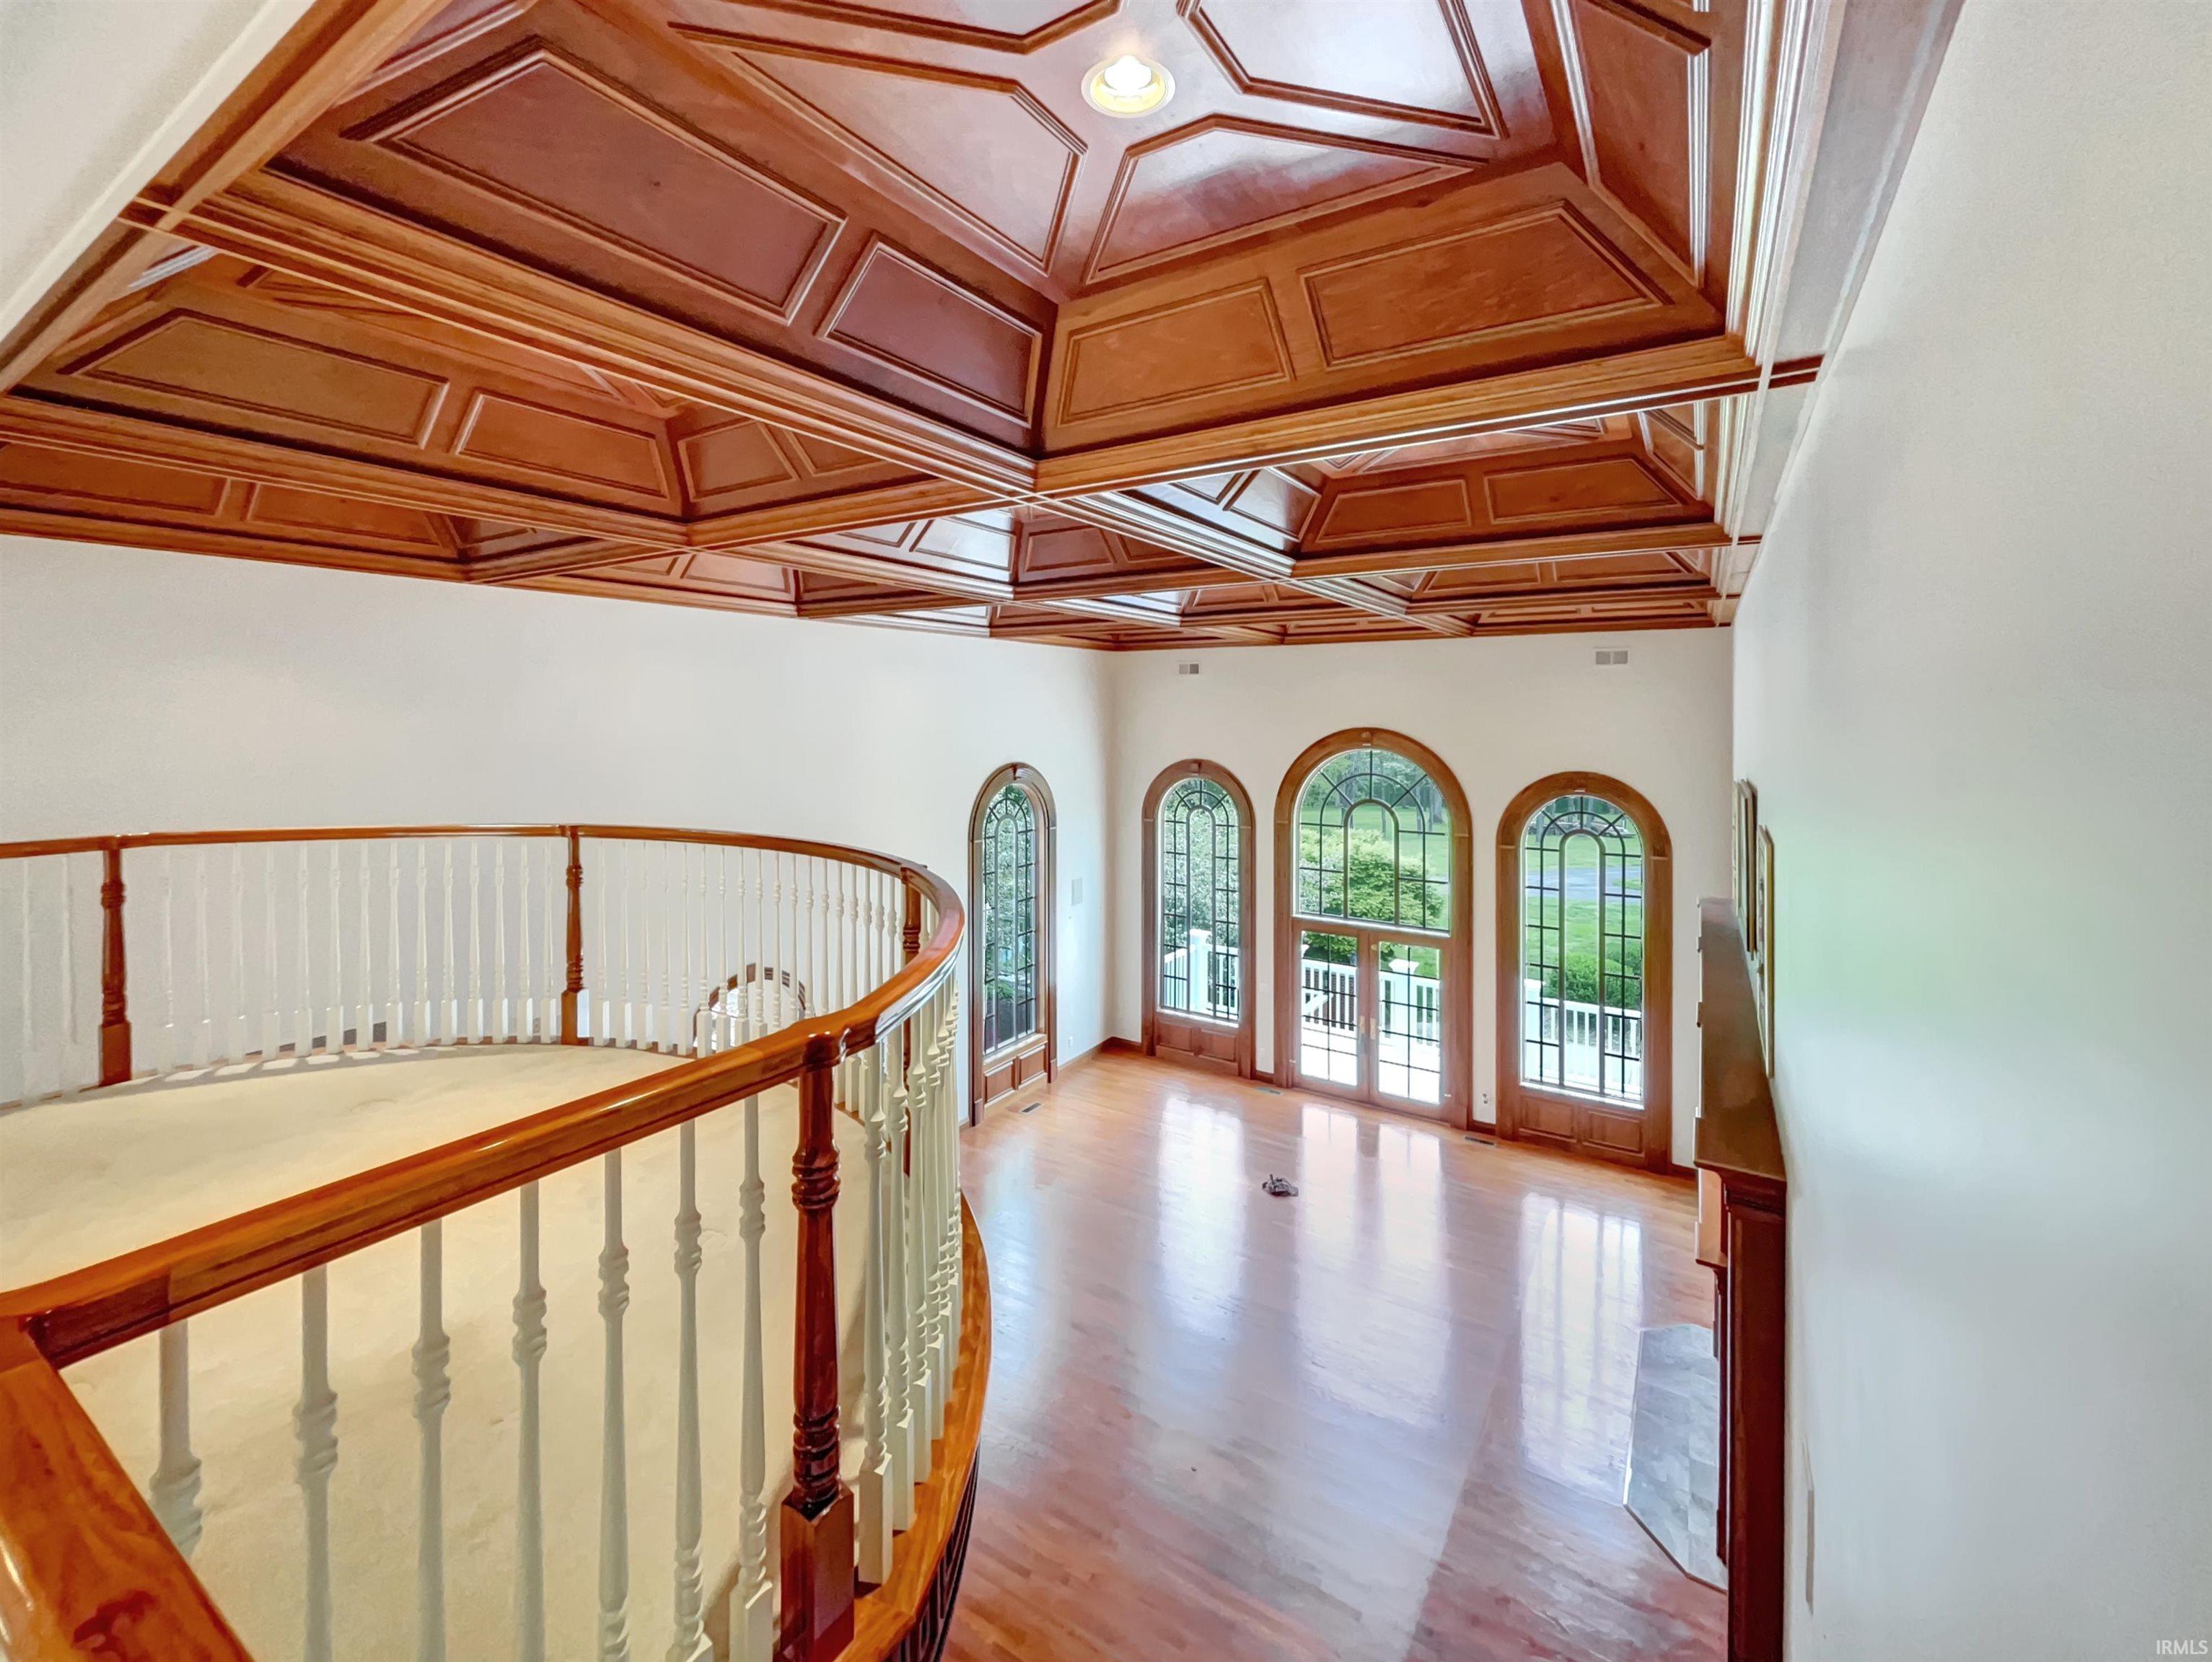 The second story balcony overlooking the family/great room